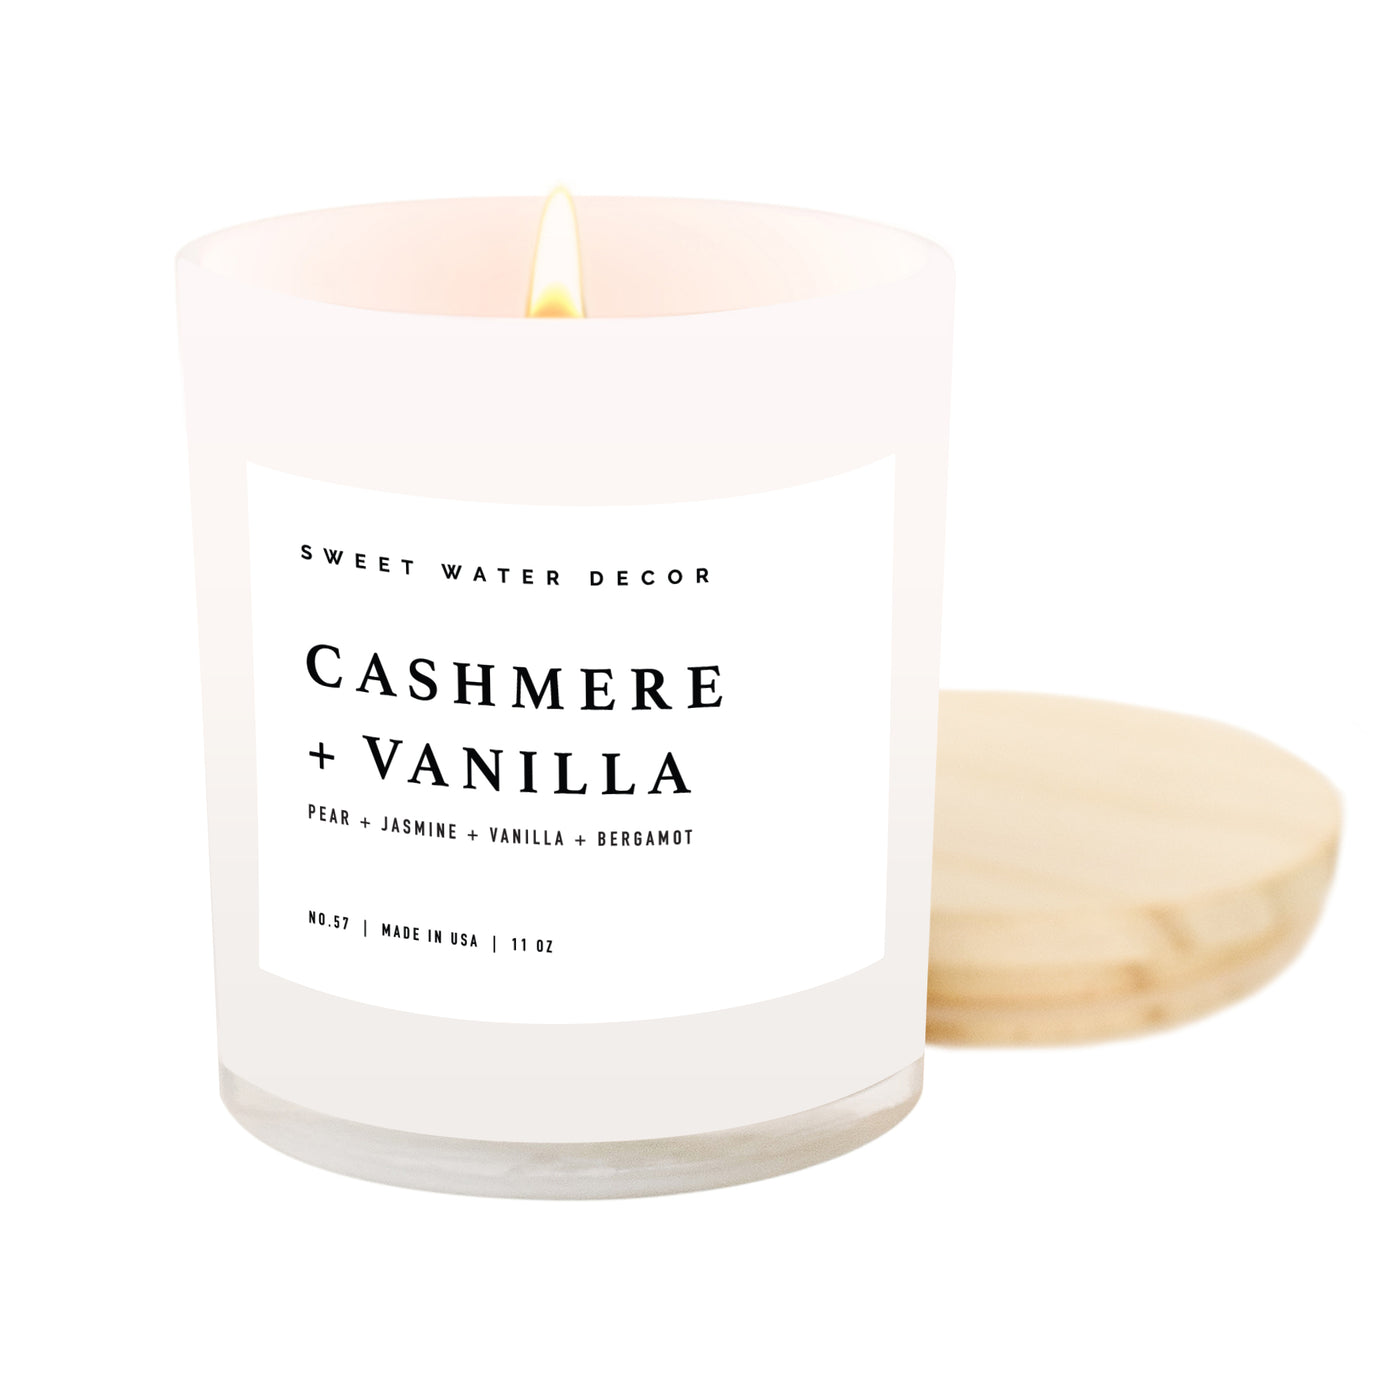 Cashmere and Vanilla Soy Candle - White Jar - 11 oz - Sweet Water Decor - Candles